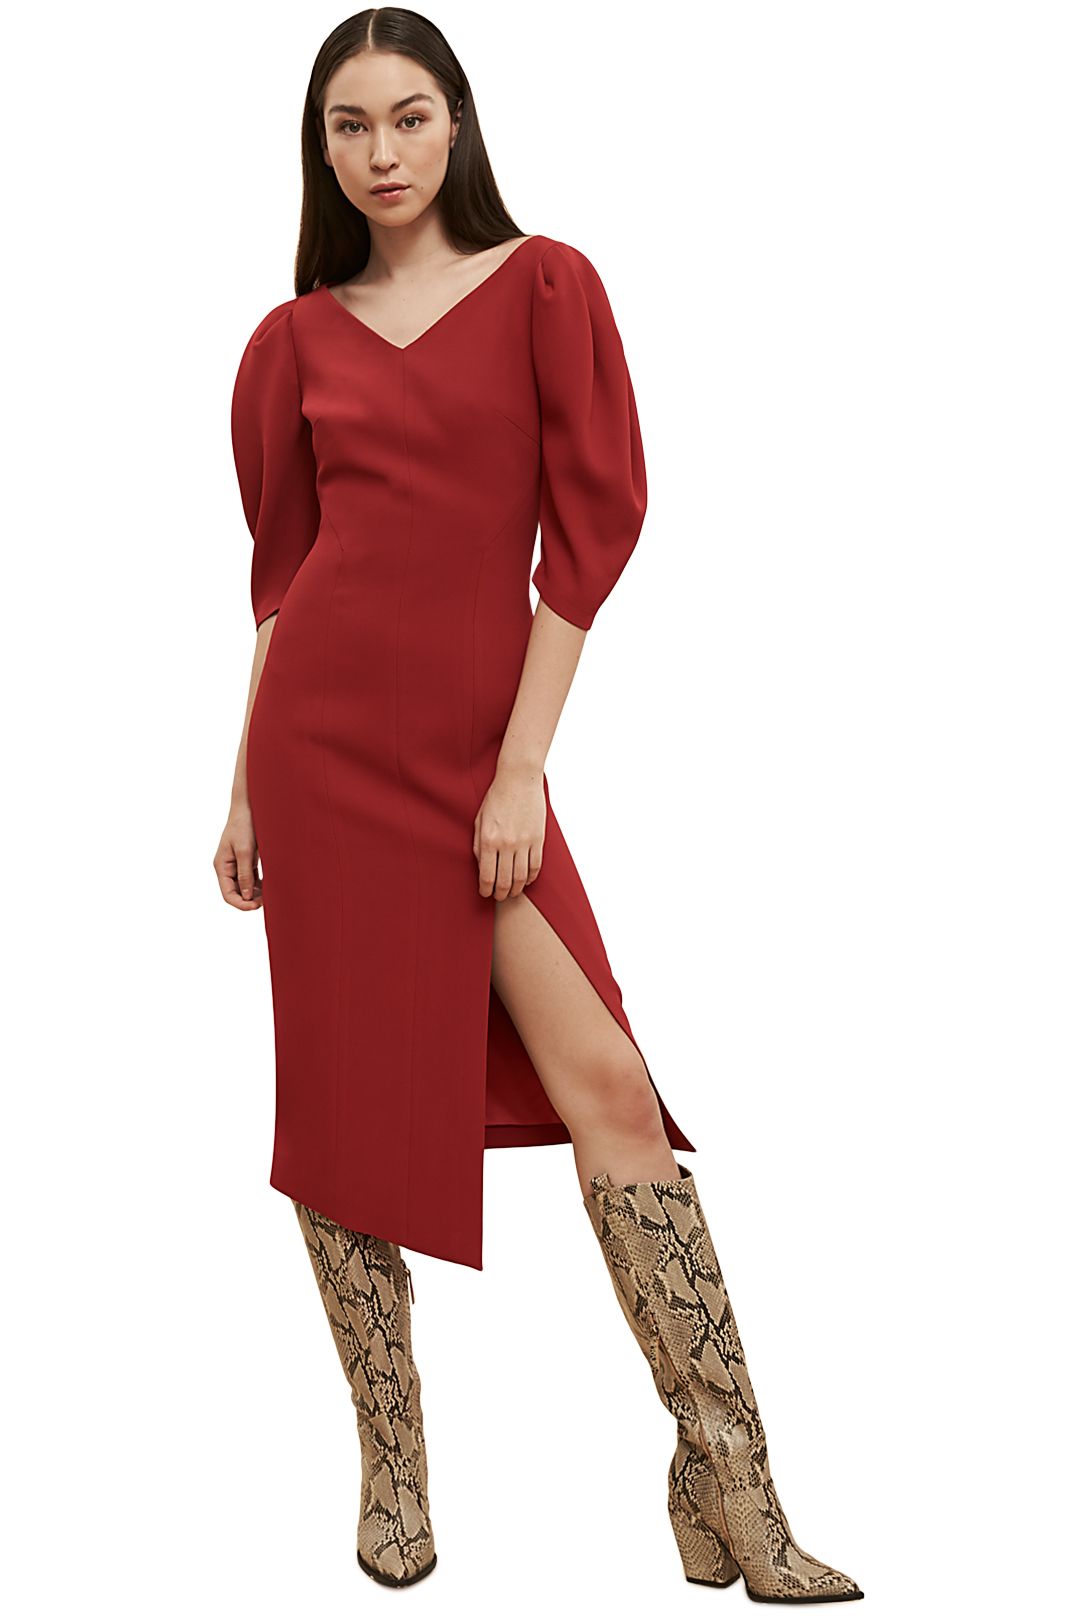 Ginger-and-Smart-Equinox-Dress-Scarlet-Red-Side